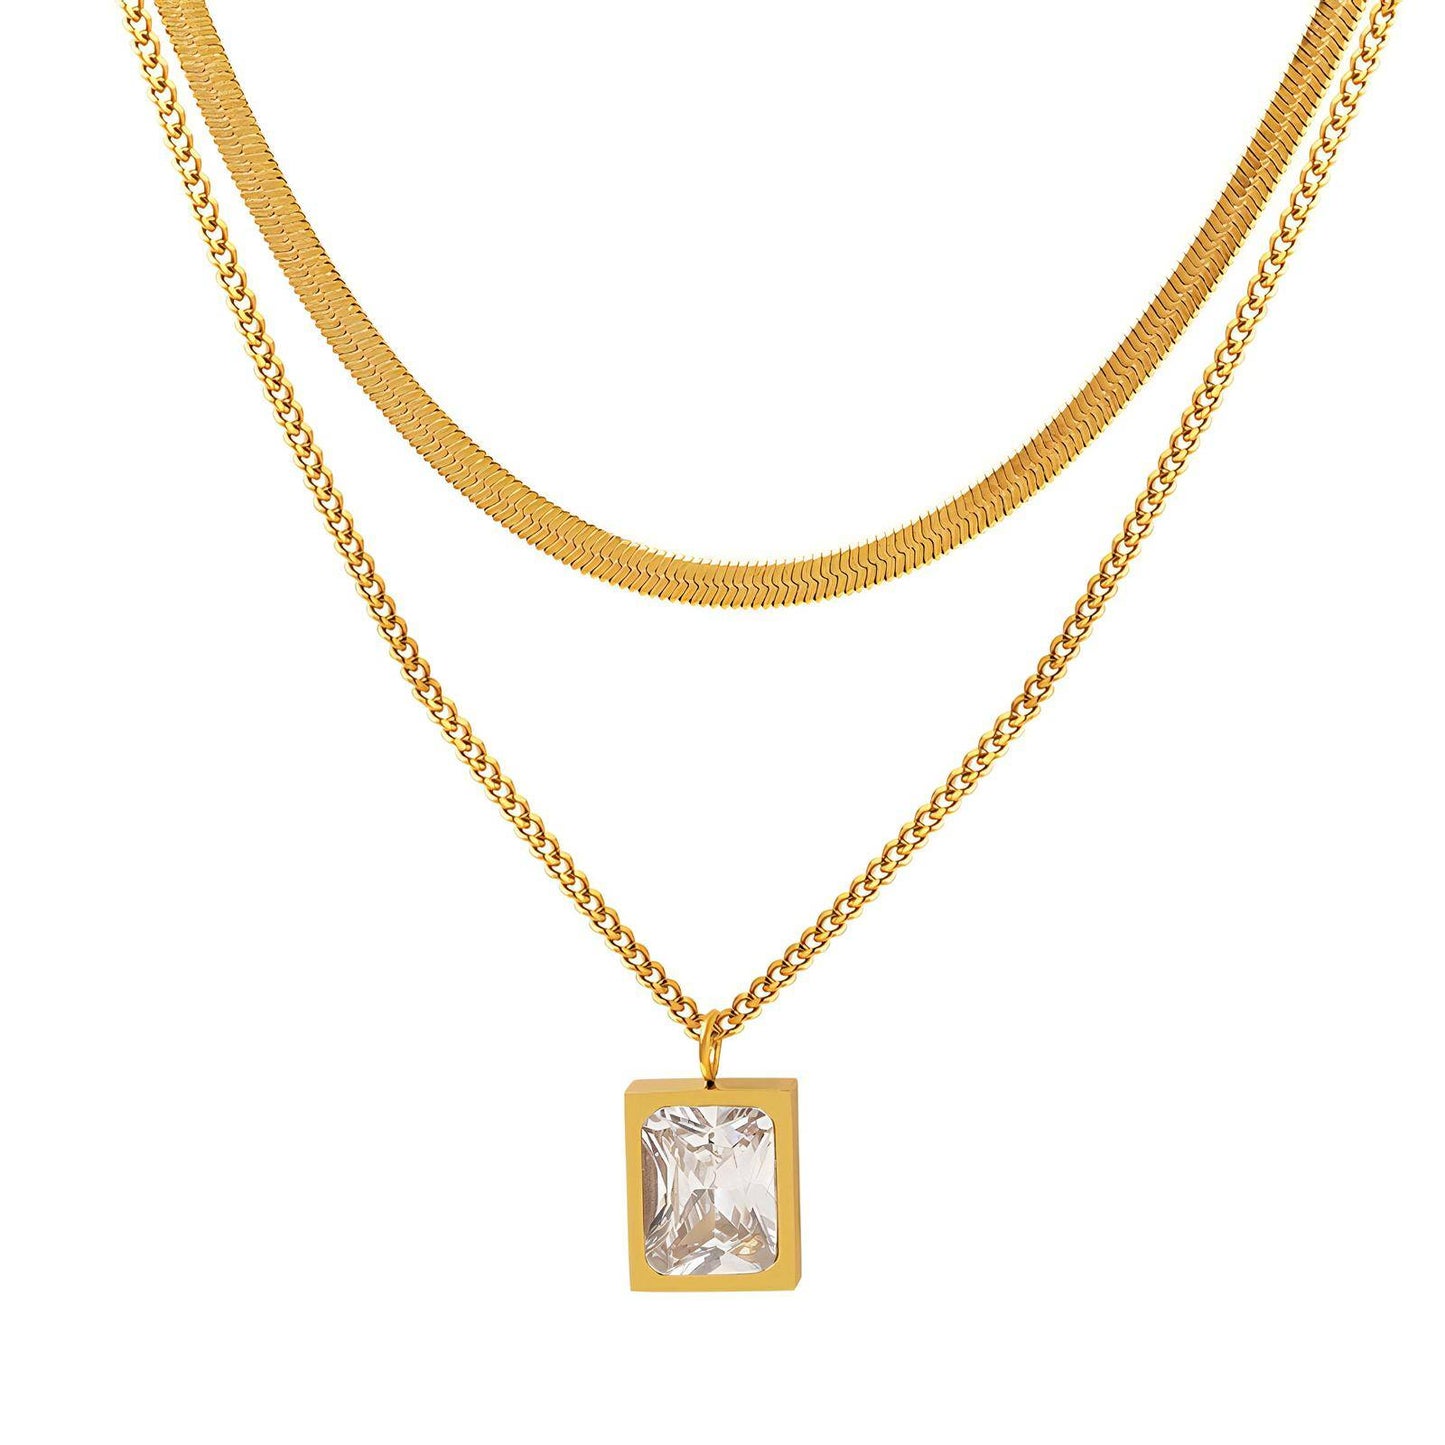 Sparkling Sophistication: Double-Layer Necklace with Zirconia Square Pendant